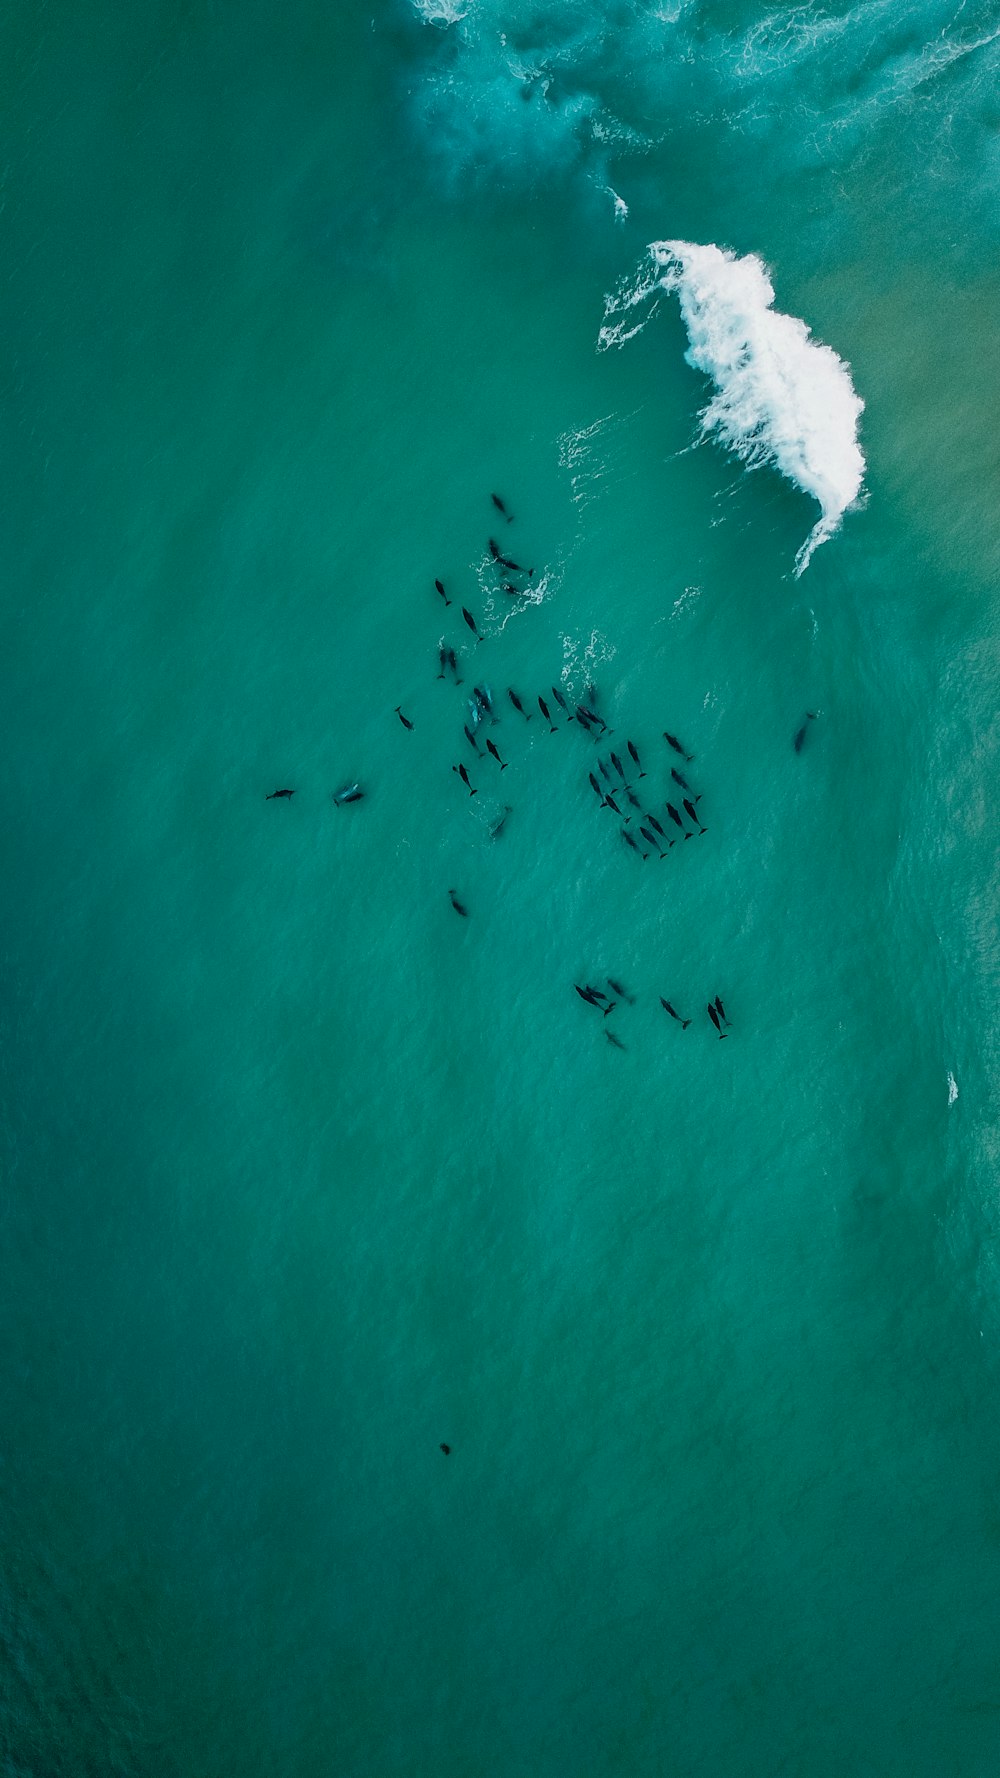 aerial view of people surfing on sea waves during daytime